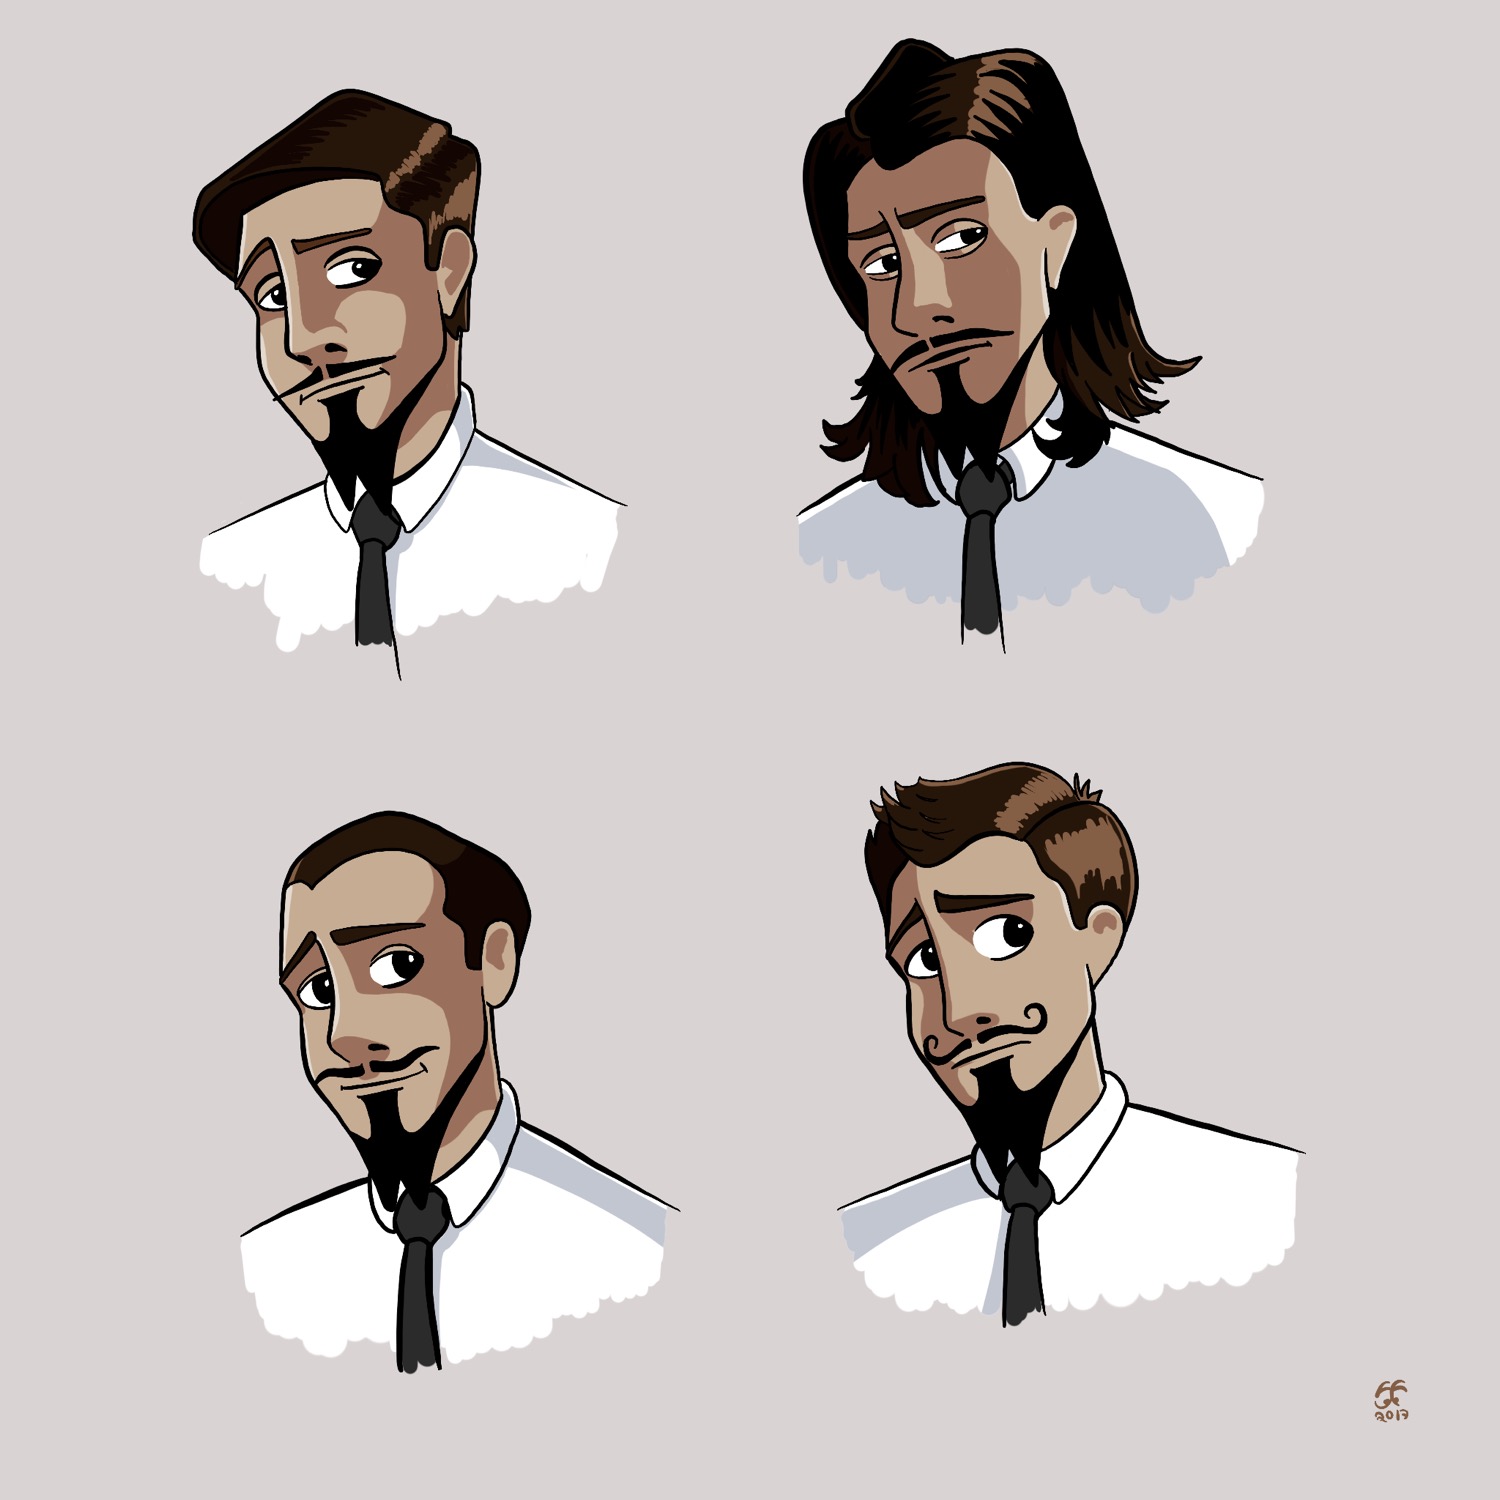 Cartoon drawing of four character heads with different haircuts and lighting